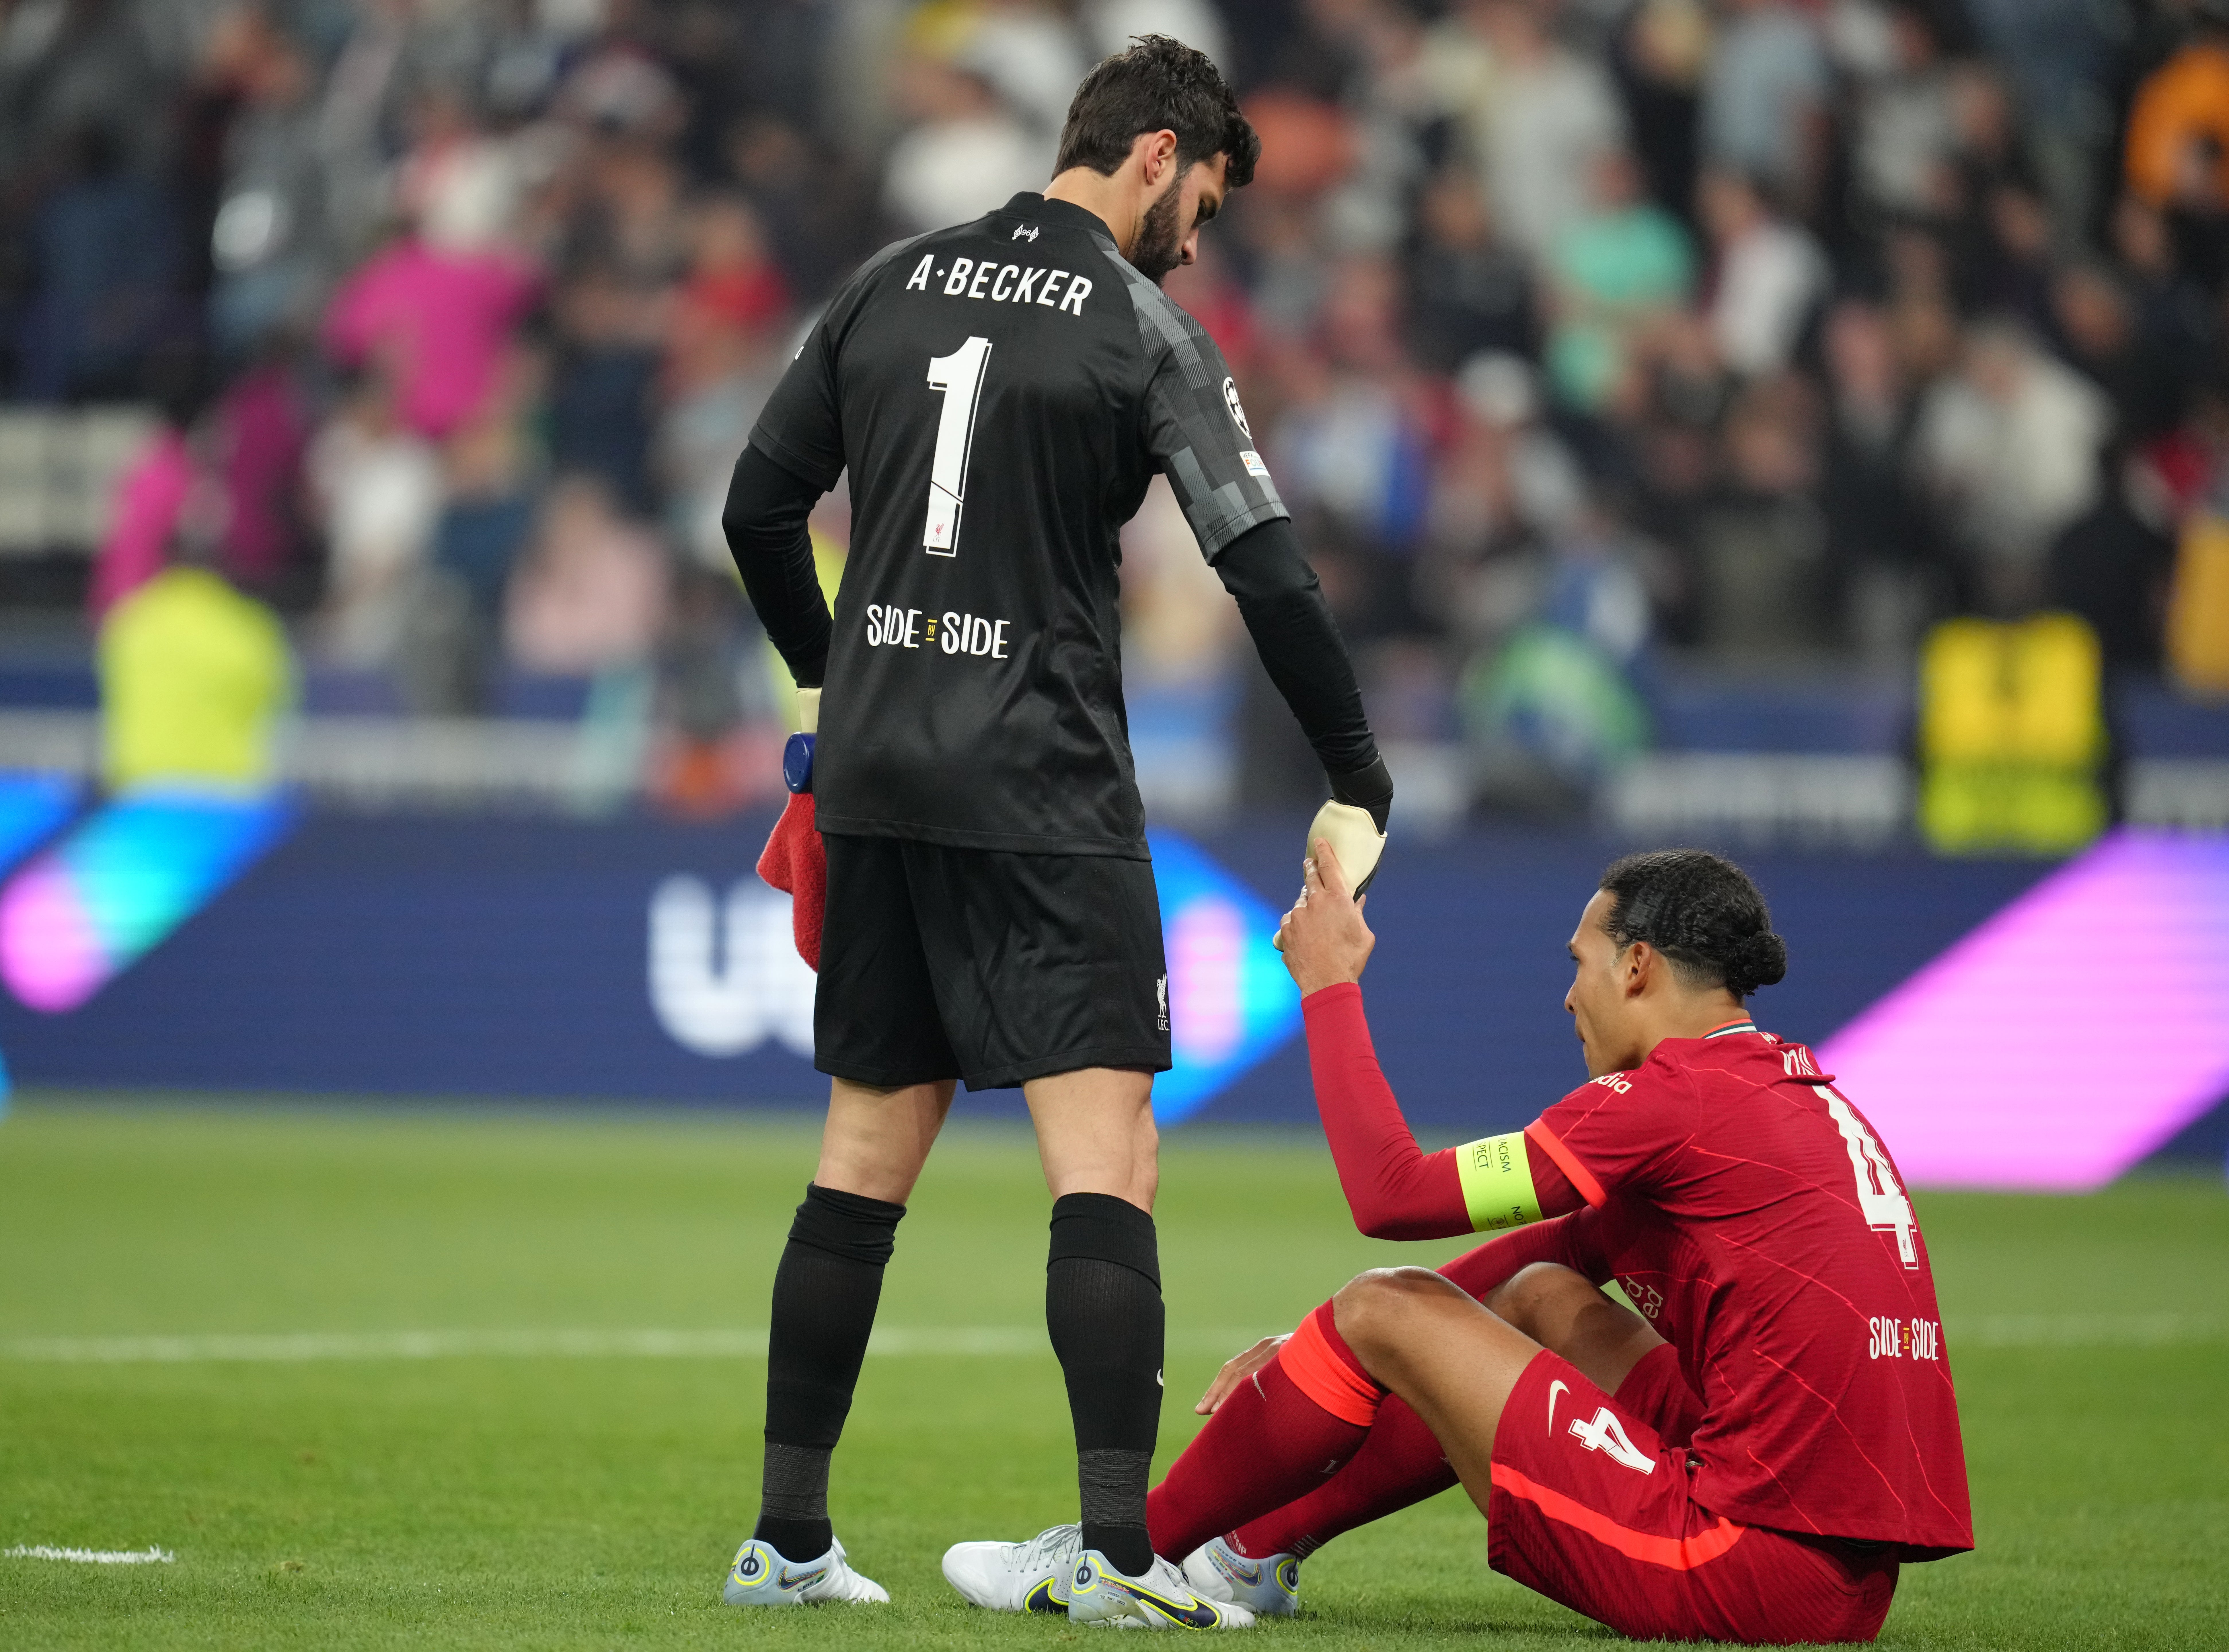 Liverpool keeper Alisson Becker consoles Virgil van Dijk after the final whistle at the Stade de France (Nick Potts/PA)